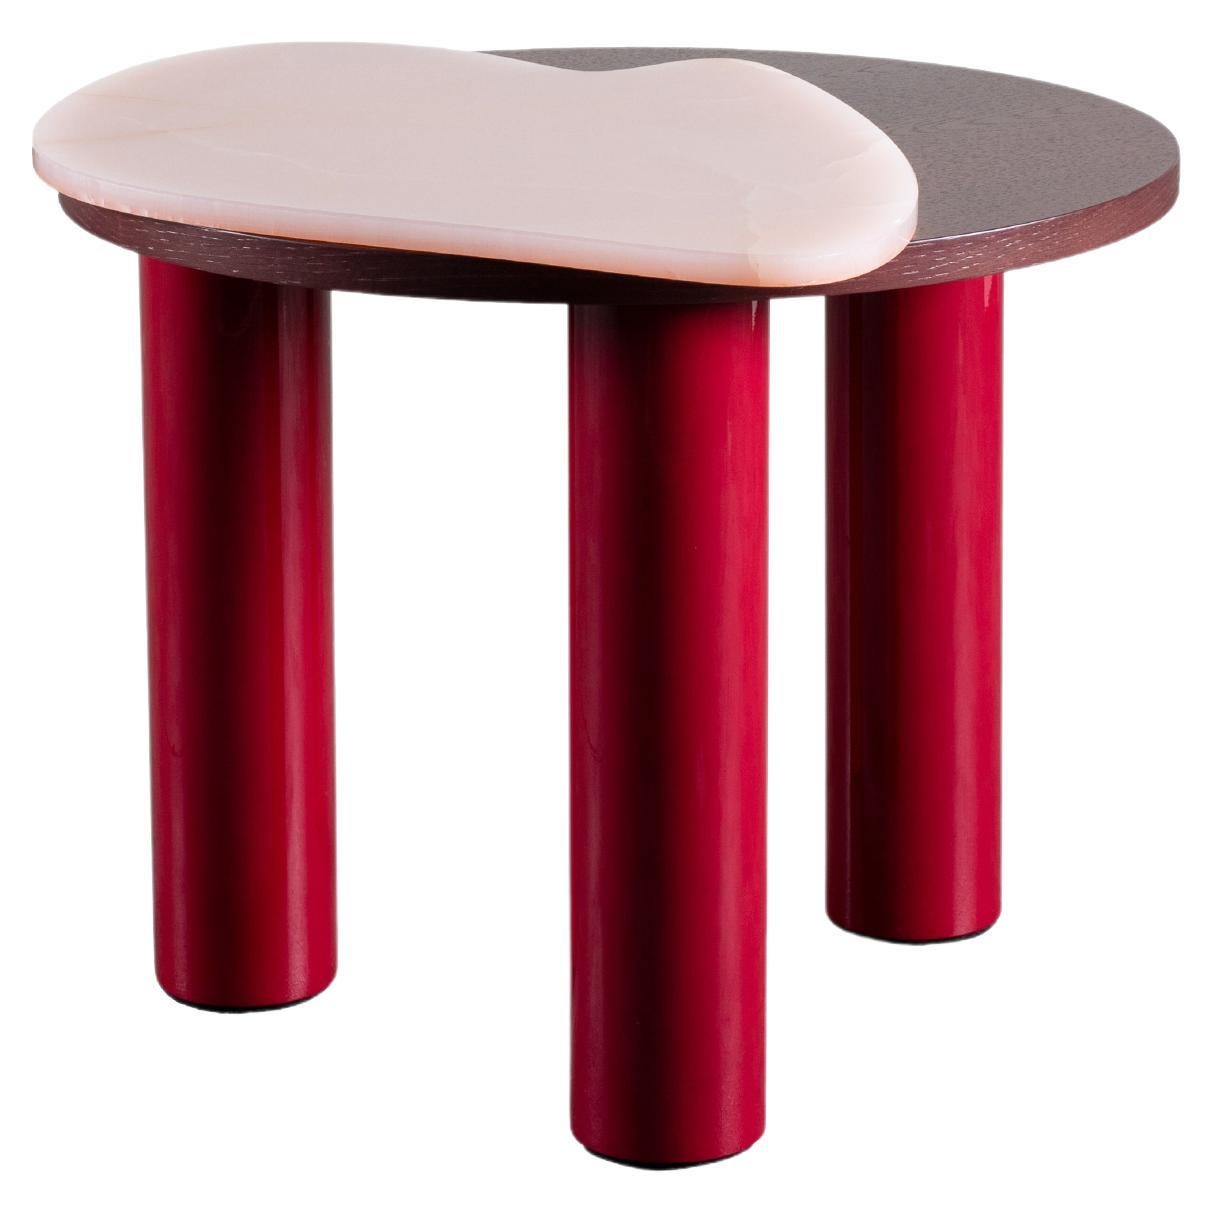 Modern Bordeira Side Table in Garnet and Pink Onyx Handcrafted by Greenapple